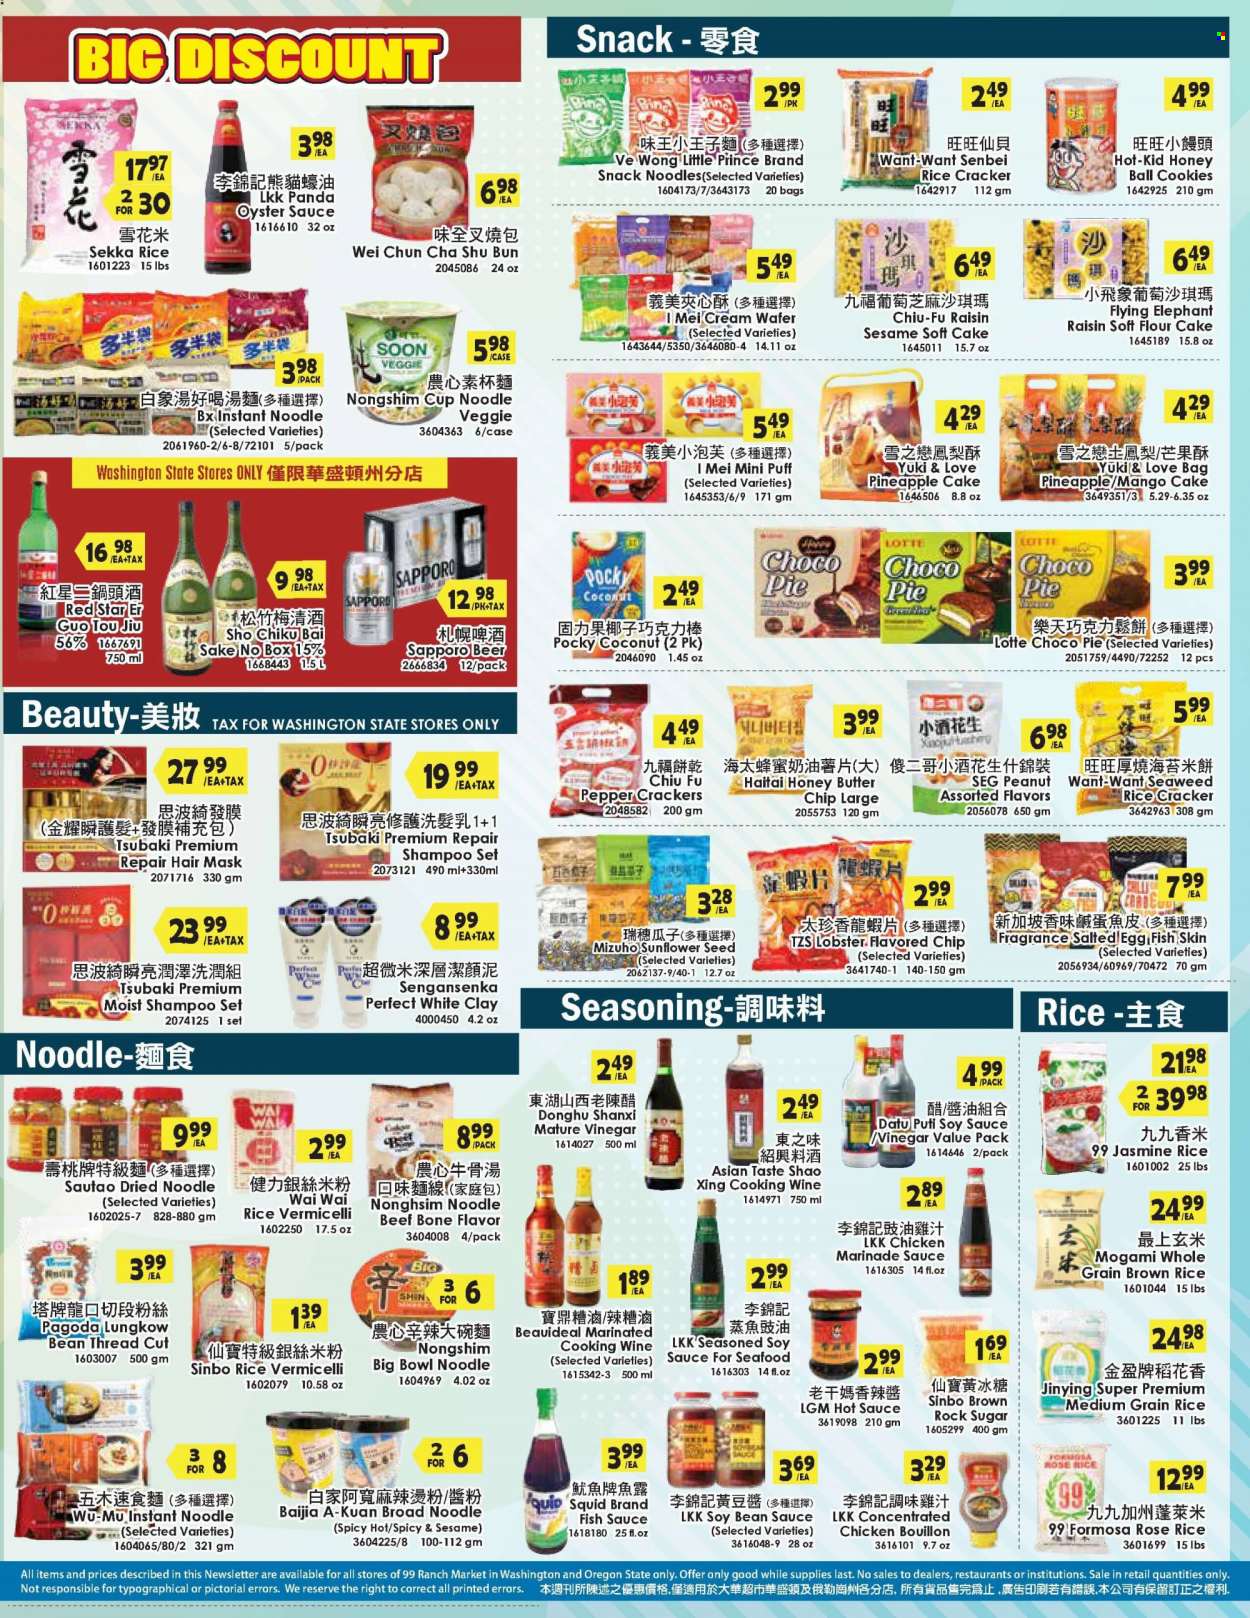 thumbnail - 99 Ranch Market Flyer - 09/23/2022 - 09/29/2022 - Sales products - cake, pie, pineapple tart, lobster, squid, oysters, seafood, fish, noodles, butter, cookies, wafers, snack, crackers, salted egg, rice crackers, bouillon, flour, brown rice, rice, jasmine rice, rice vermicelli, medium grain rice, pepper, spice, fish sauce, soy sauce, hot sauce, oyster sauce, marinade, vinegar, honey, Bai, tea, cooking wine, rosé wine, sake, beer, hair mask, fragrance, cup. Page 3.